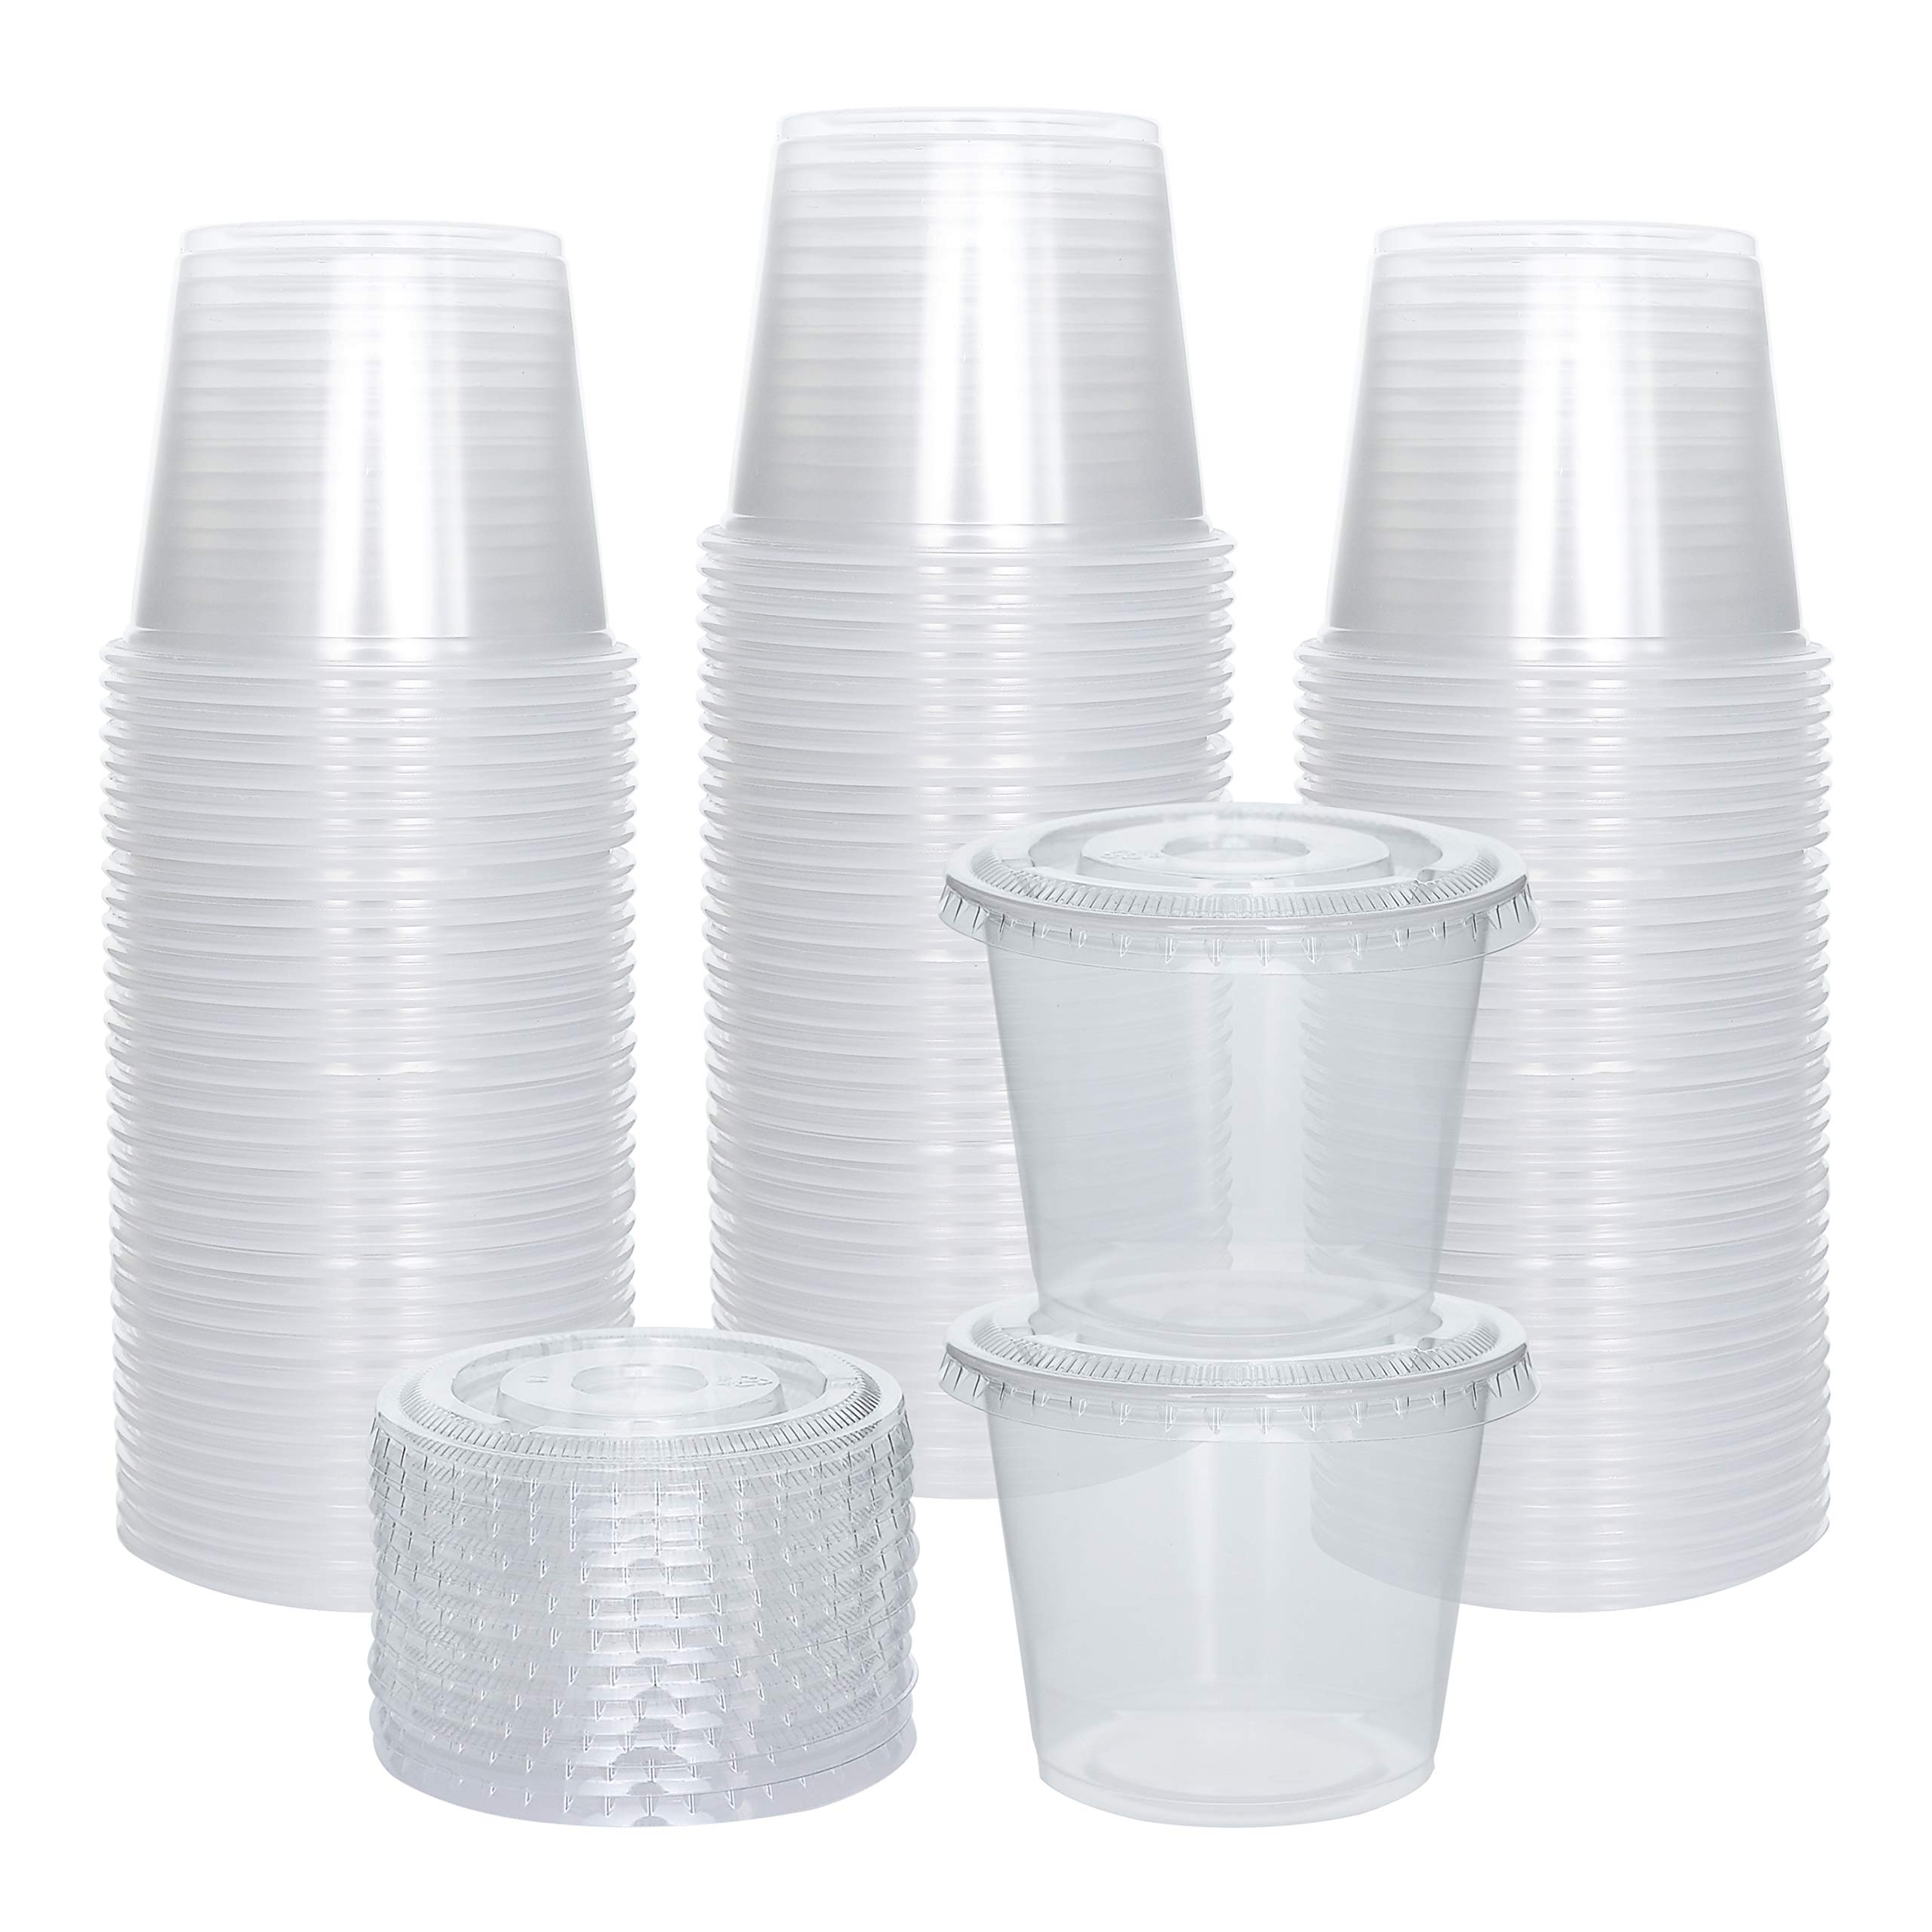 Clear Disposable Plastic Portion Cups With Lids (100 Sets - 1 Oz